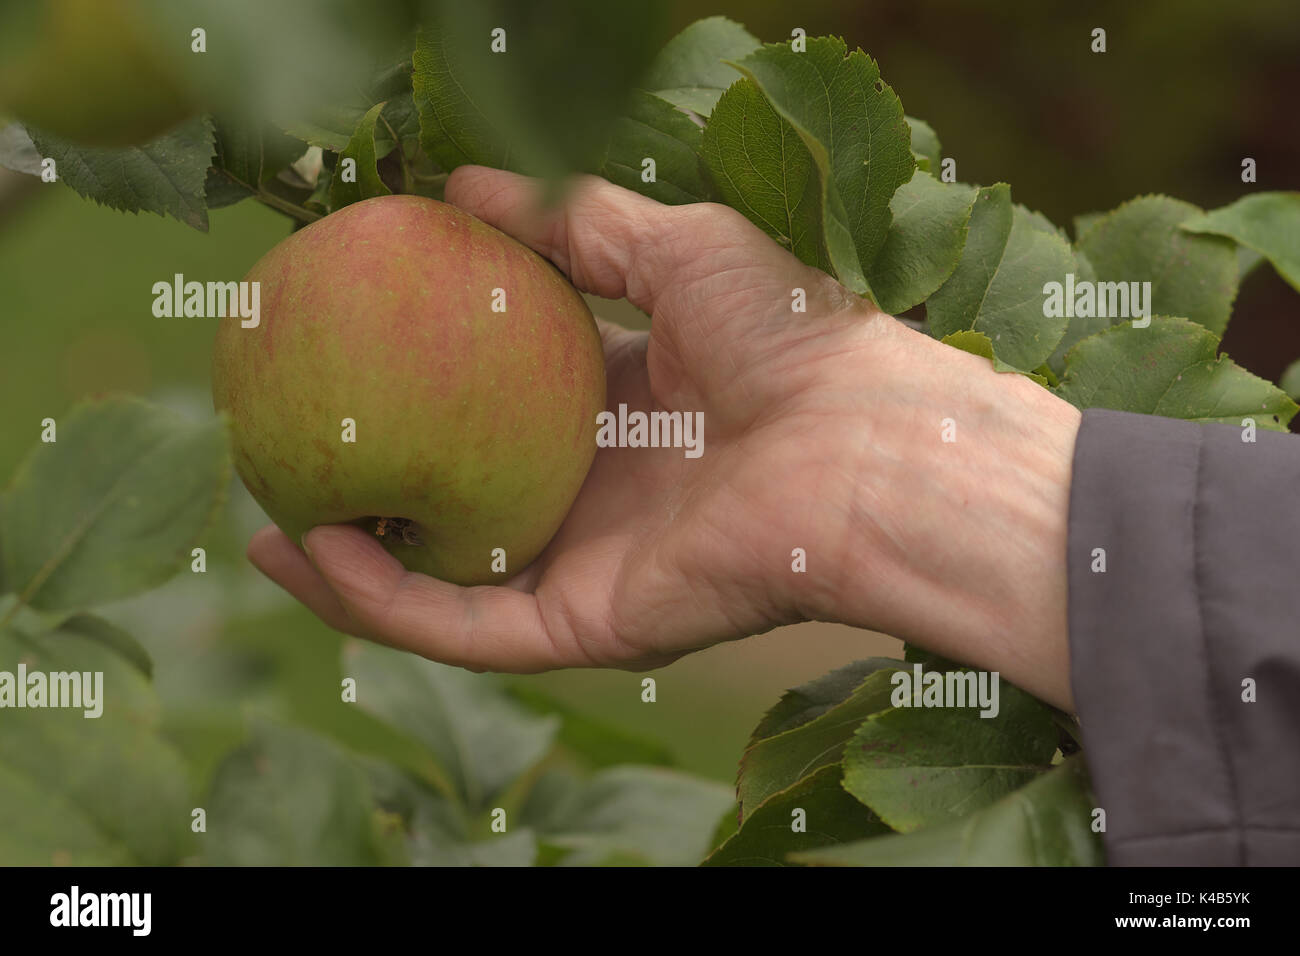 A close-up of a hand picking a ripe Blenheim Orange apple against a background of the tree's leaves Stock Photo